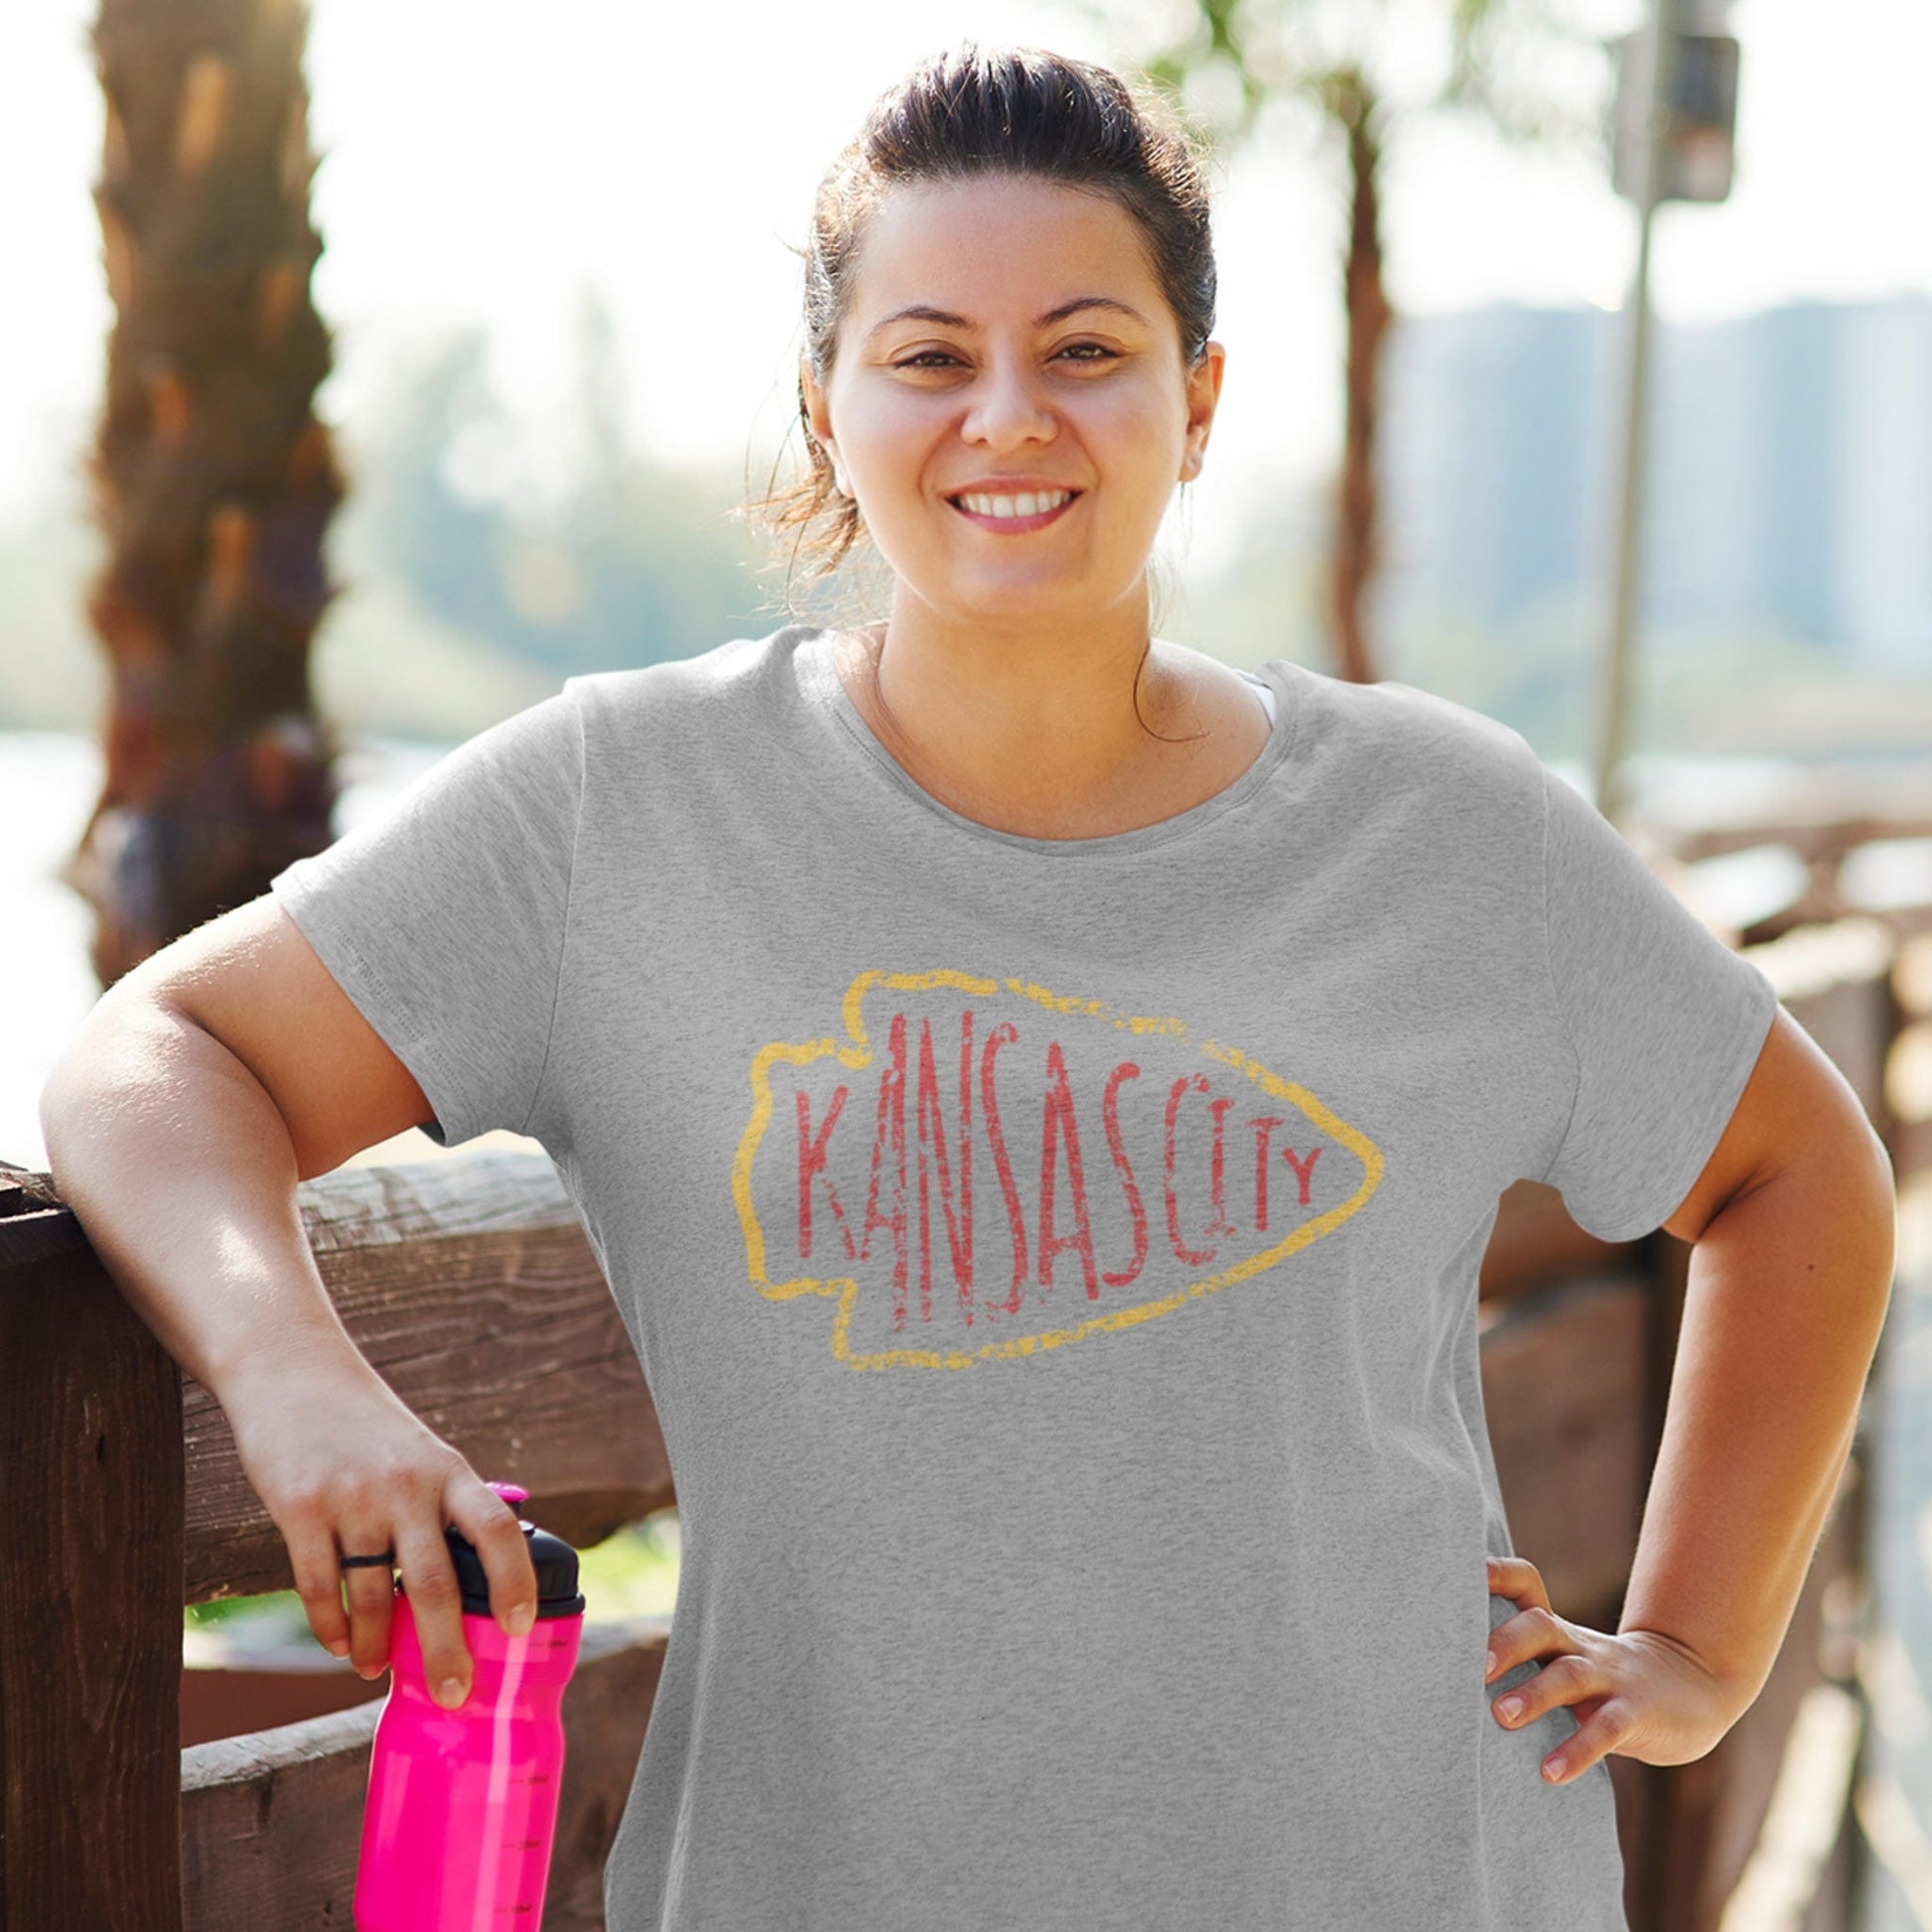 KC Swag Kansas City Chiefs red KANSA CITY inside yellow arrowhead outline on athletic heather grey t-shirt worn by female model in sunny outdoor setting